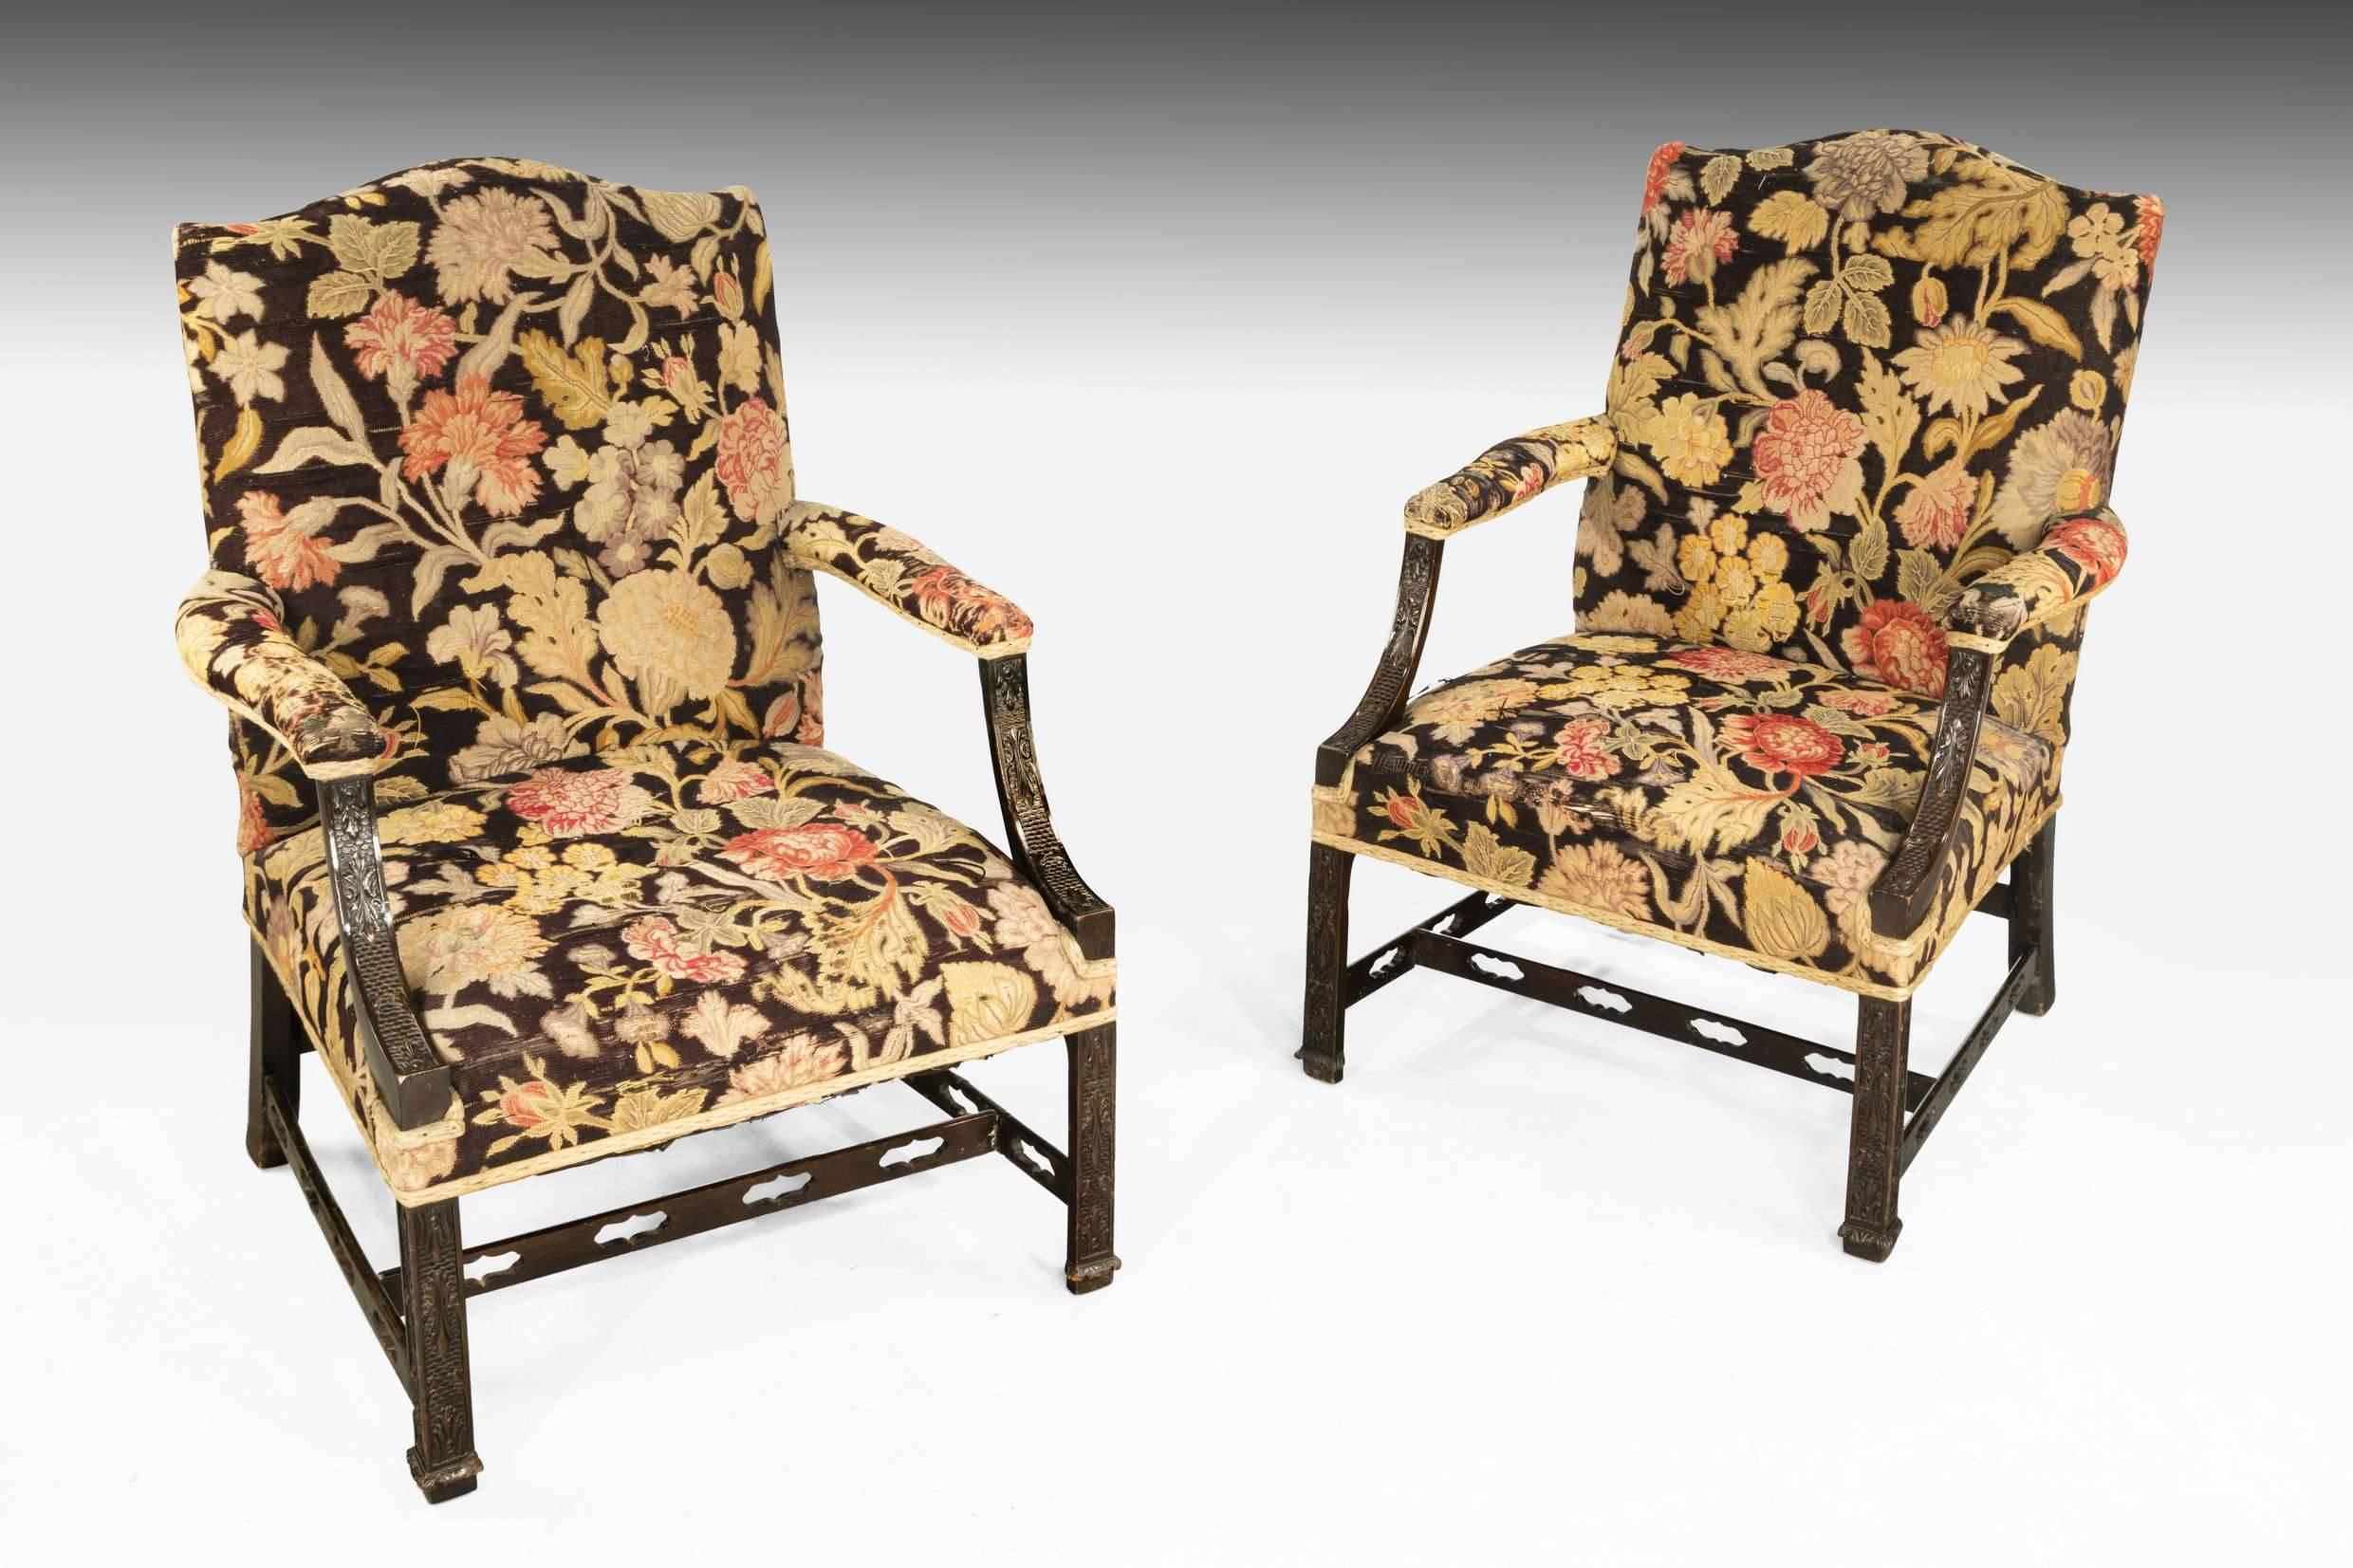 Pair of Chippendale Style Mahogany Gainsborough Chairs In Good Condition For Sale In Peterborough, Northamptonshire